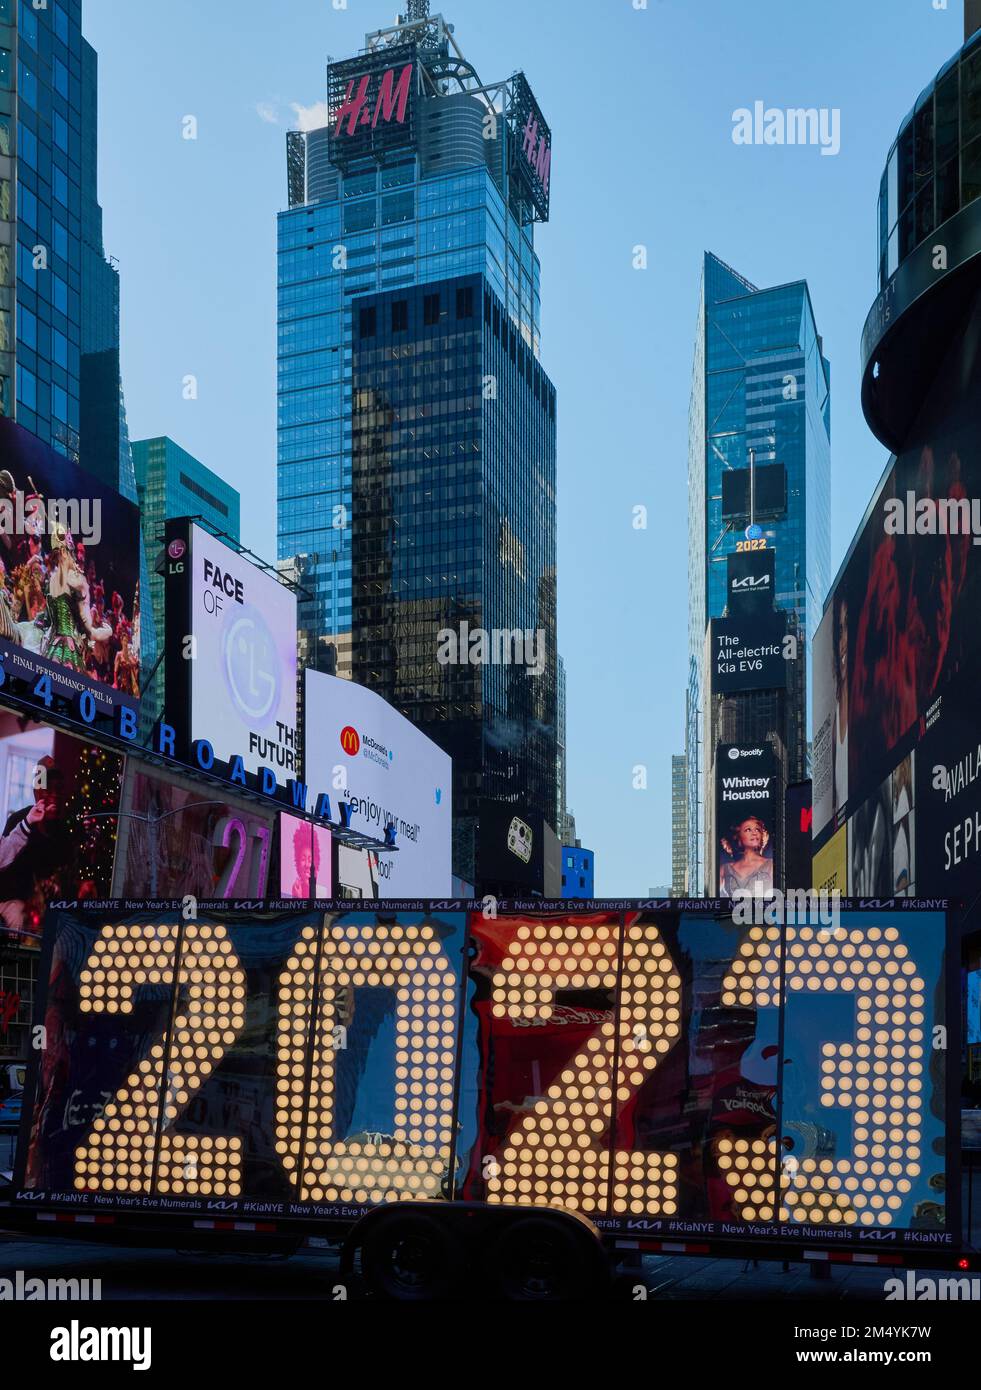 NEW YORK, NY, USA - DECEMBER 20, 2022: New Year's Eve 2023 Numerals Arrive in Times Square. Stock Photo